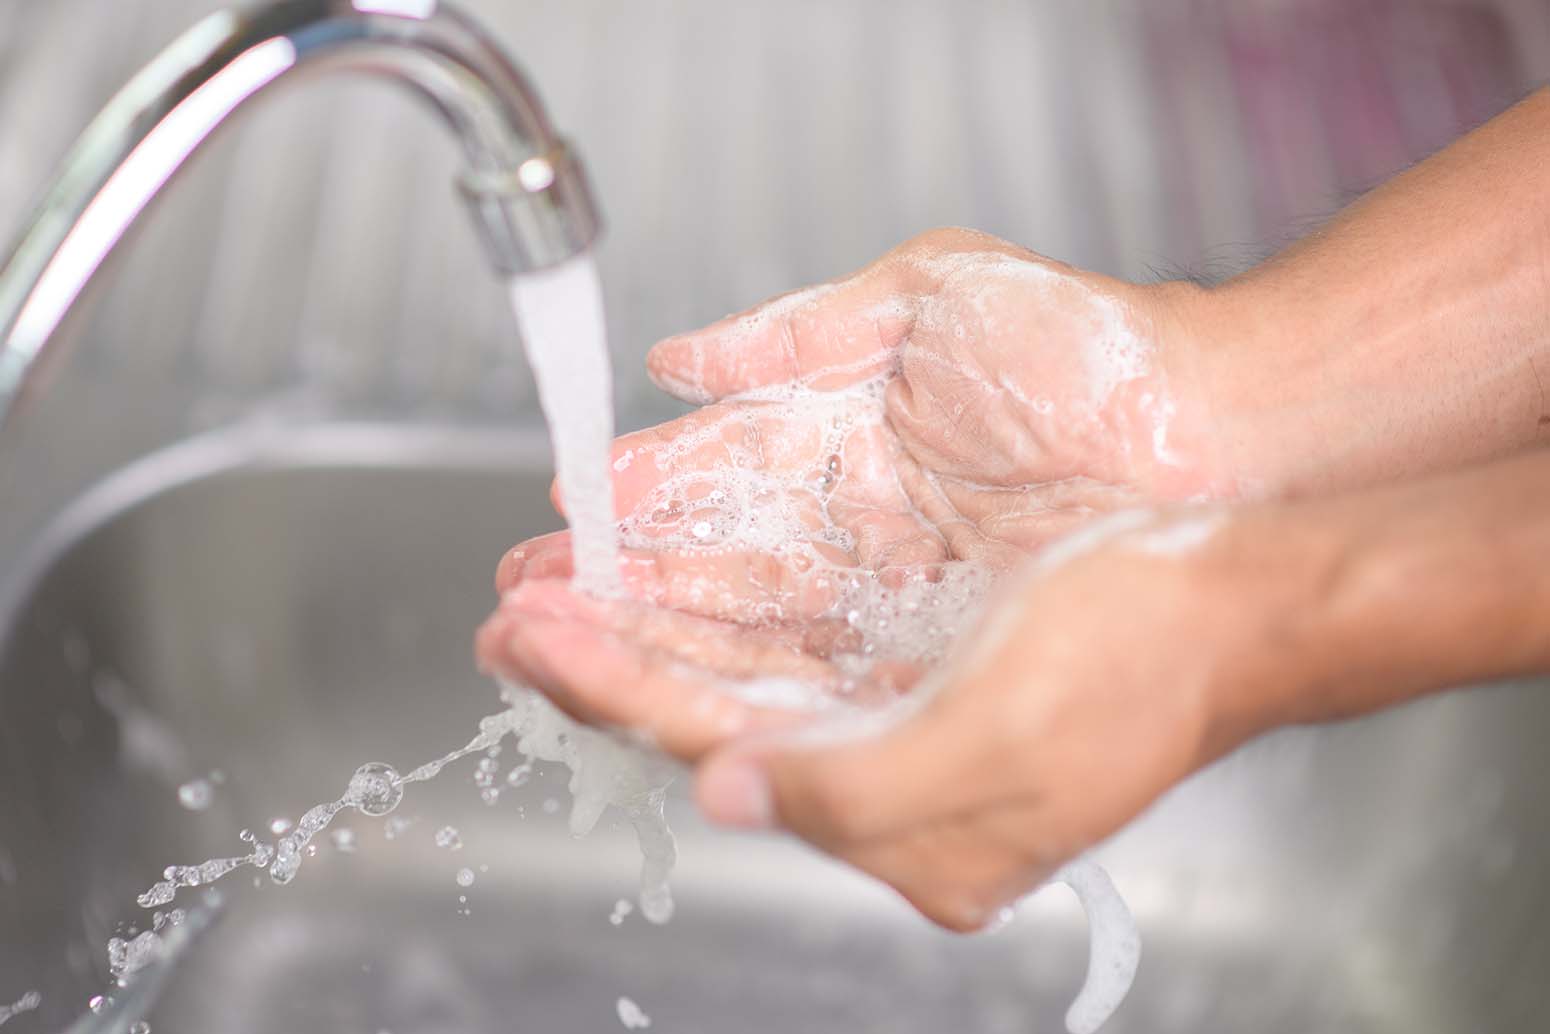 Handwashing Steps to Prevent Infections - Grainger KnowHow